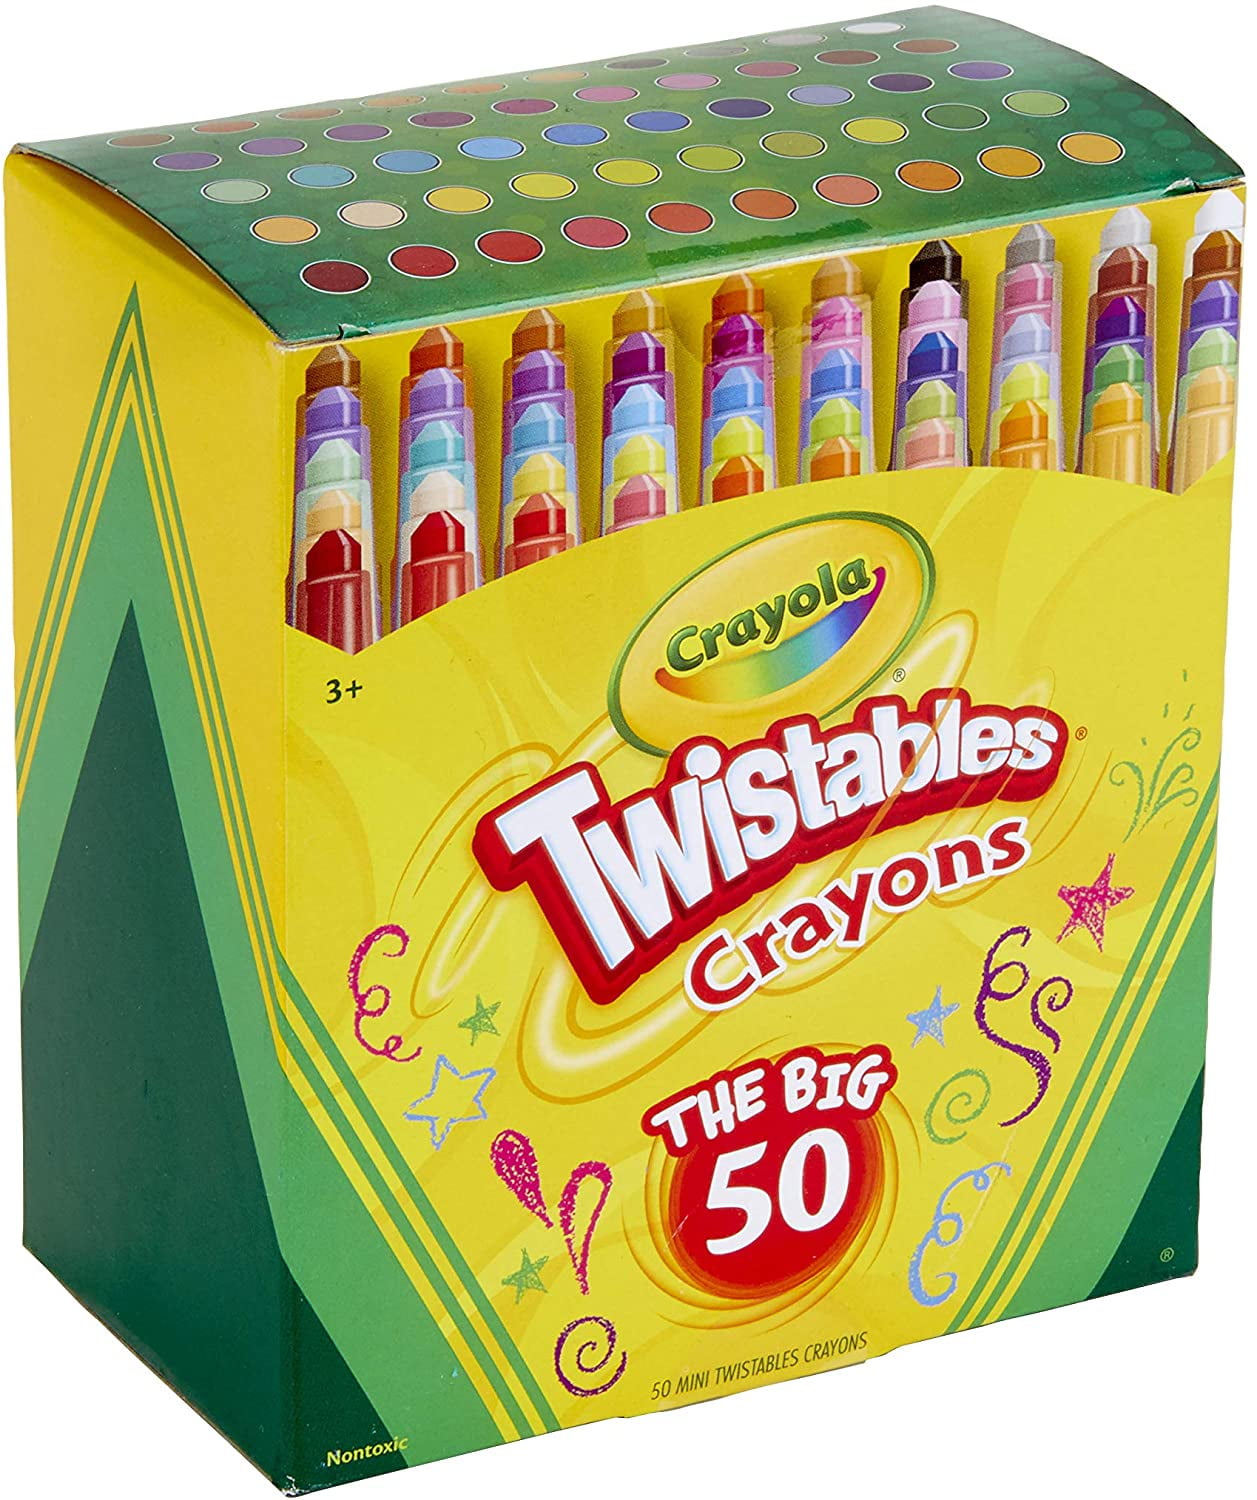 Crayola Twistables Crayons Coloring Set, Twist Up Crayons for Kids, 10  Count - Bussinger Trains  & Toys!